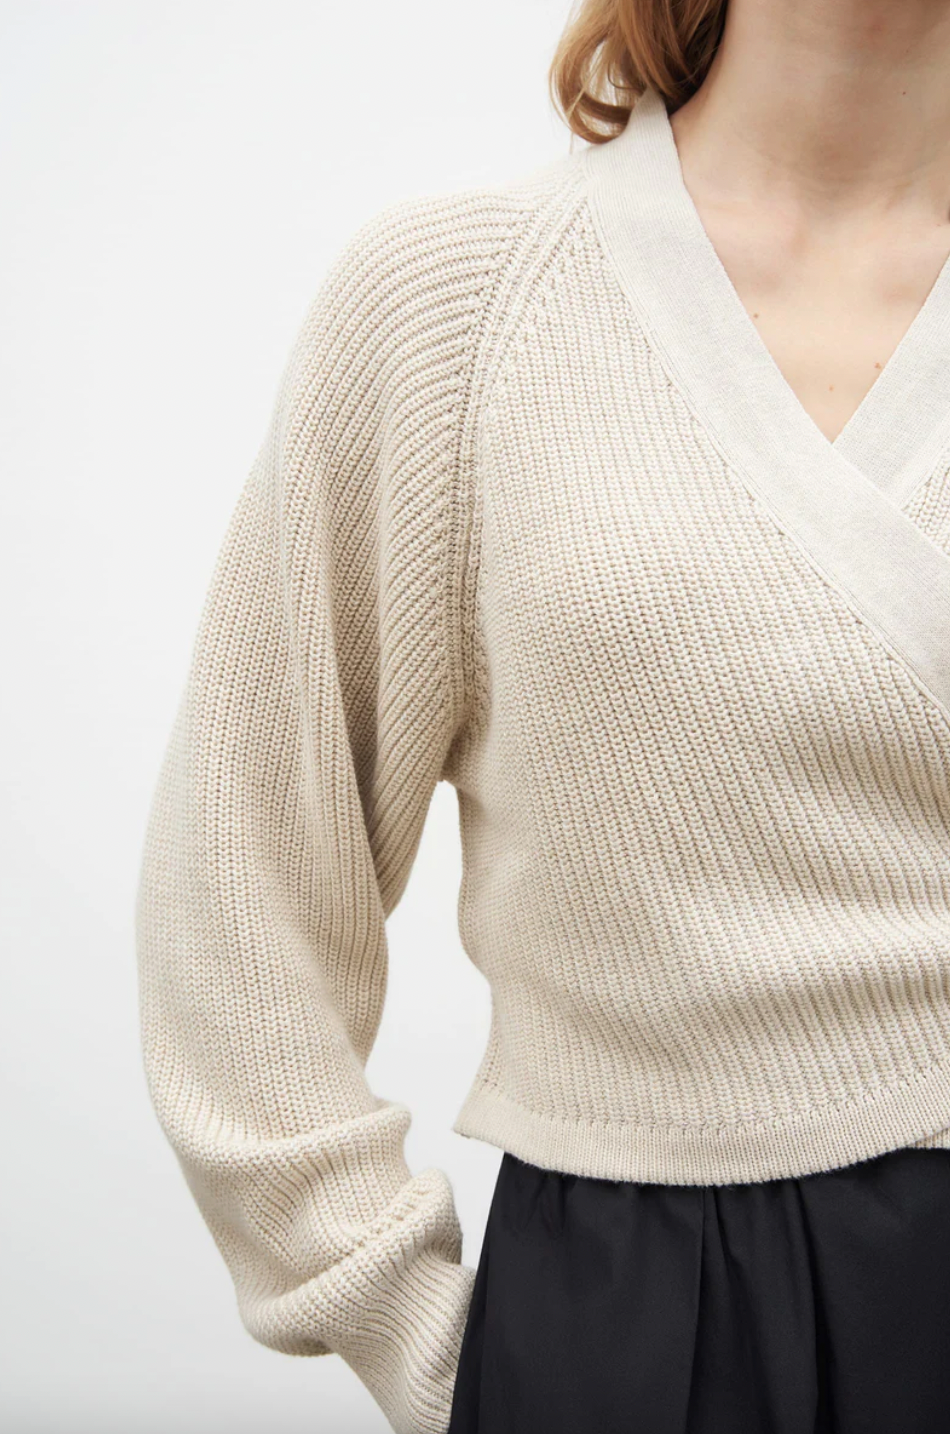 Product Image for Composure Cardigan, Light Marle